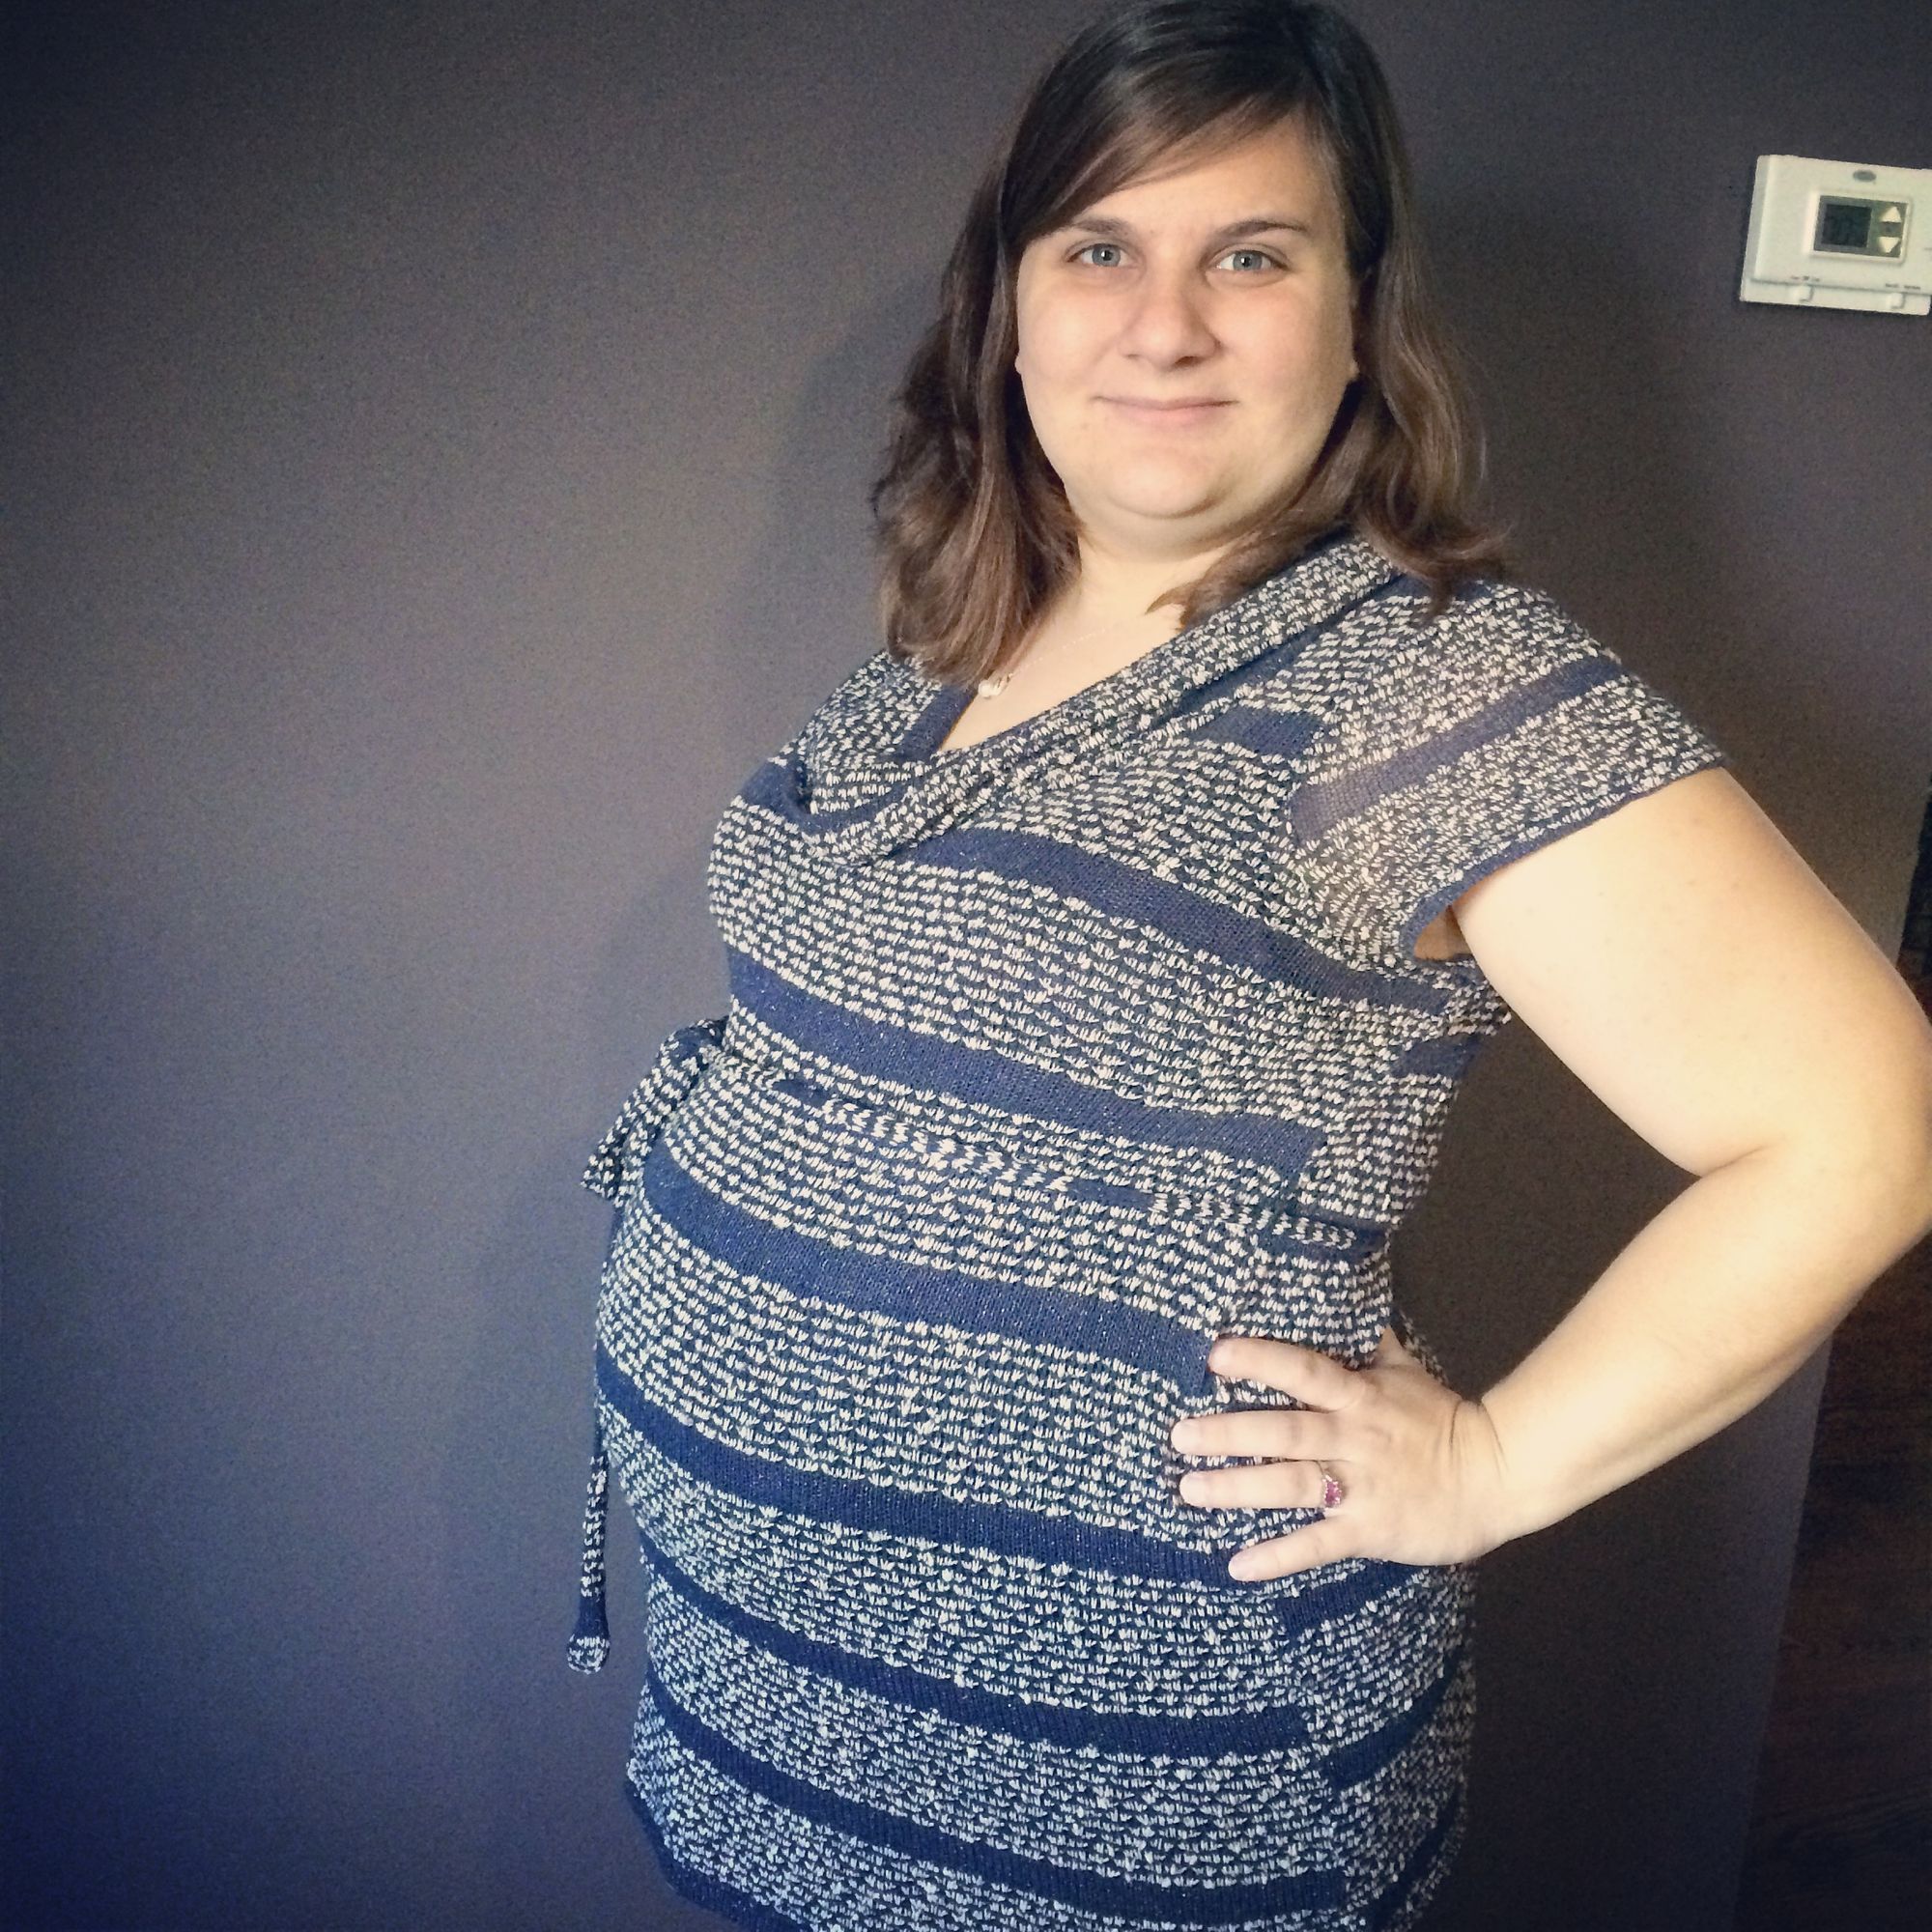 33 Weeks, and counting